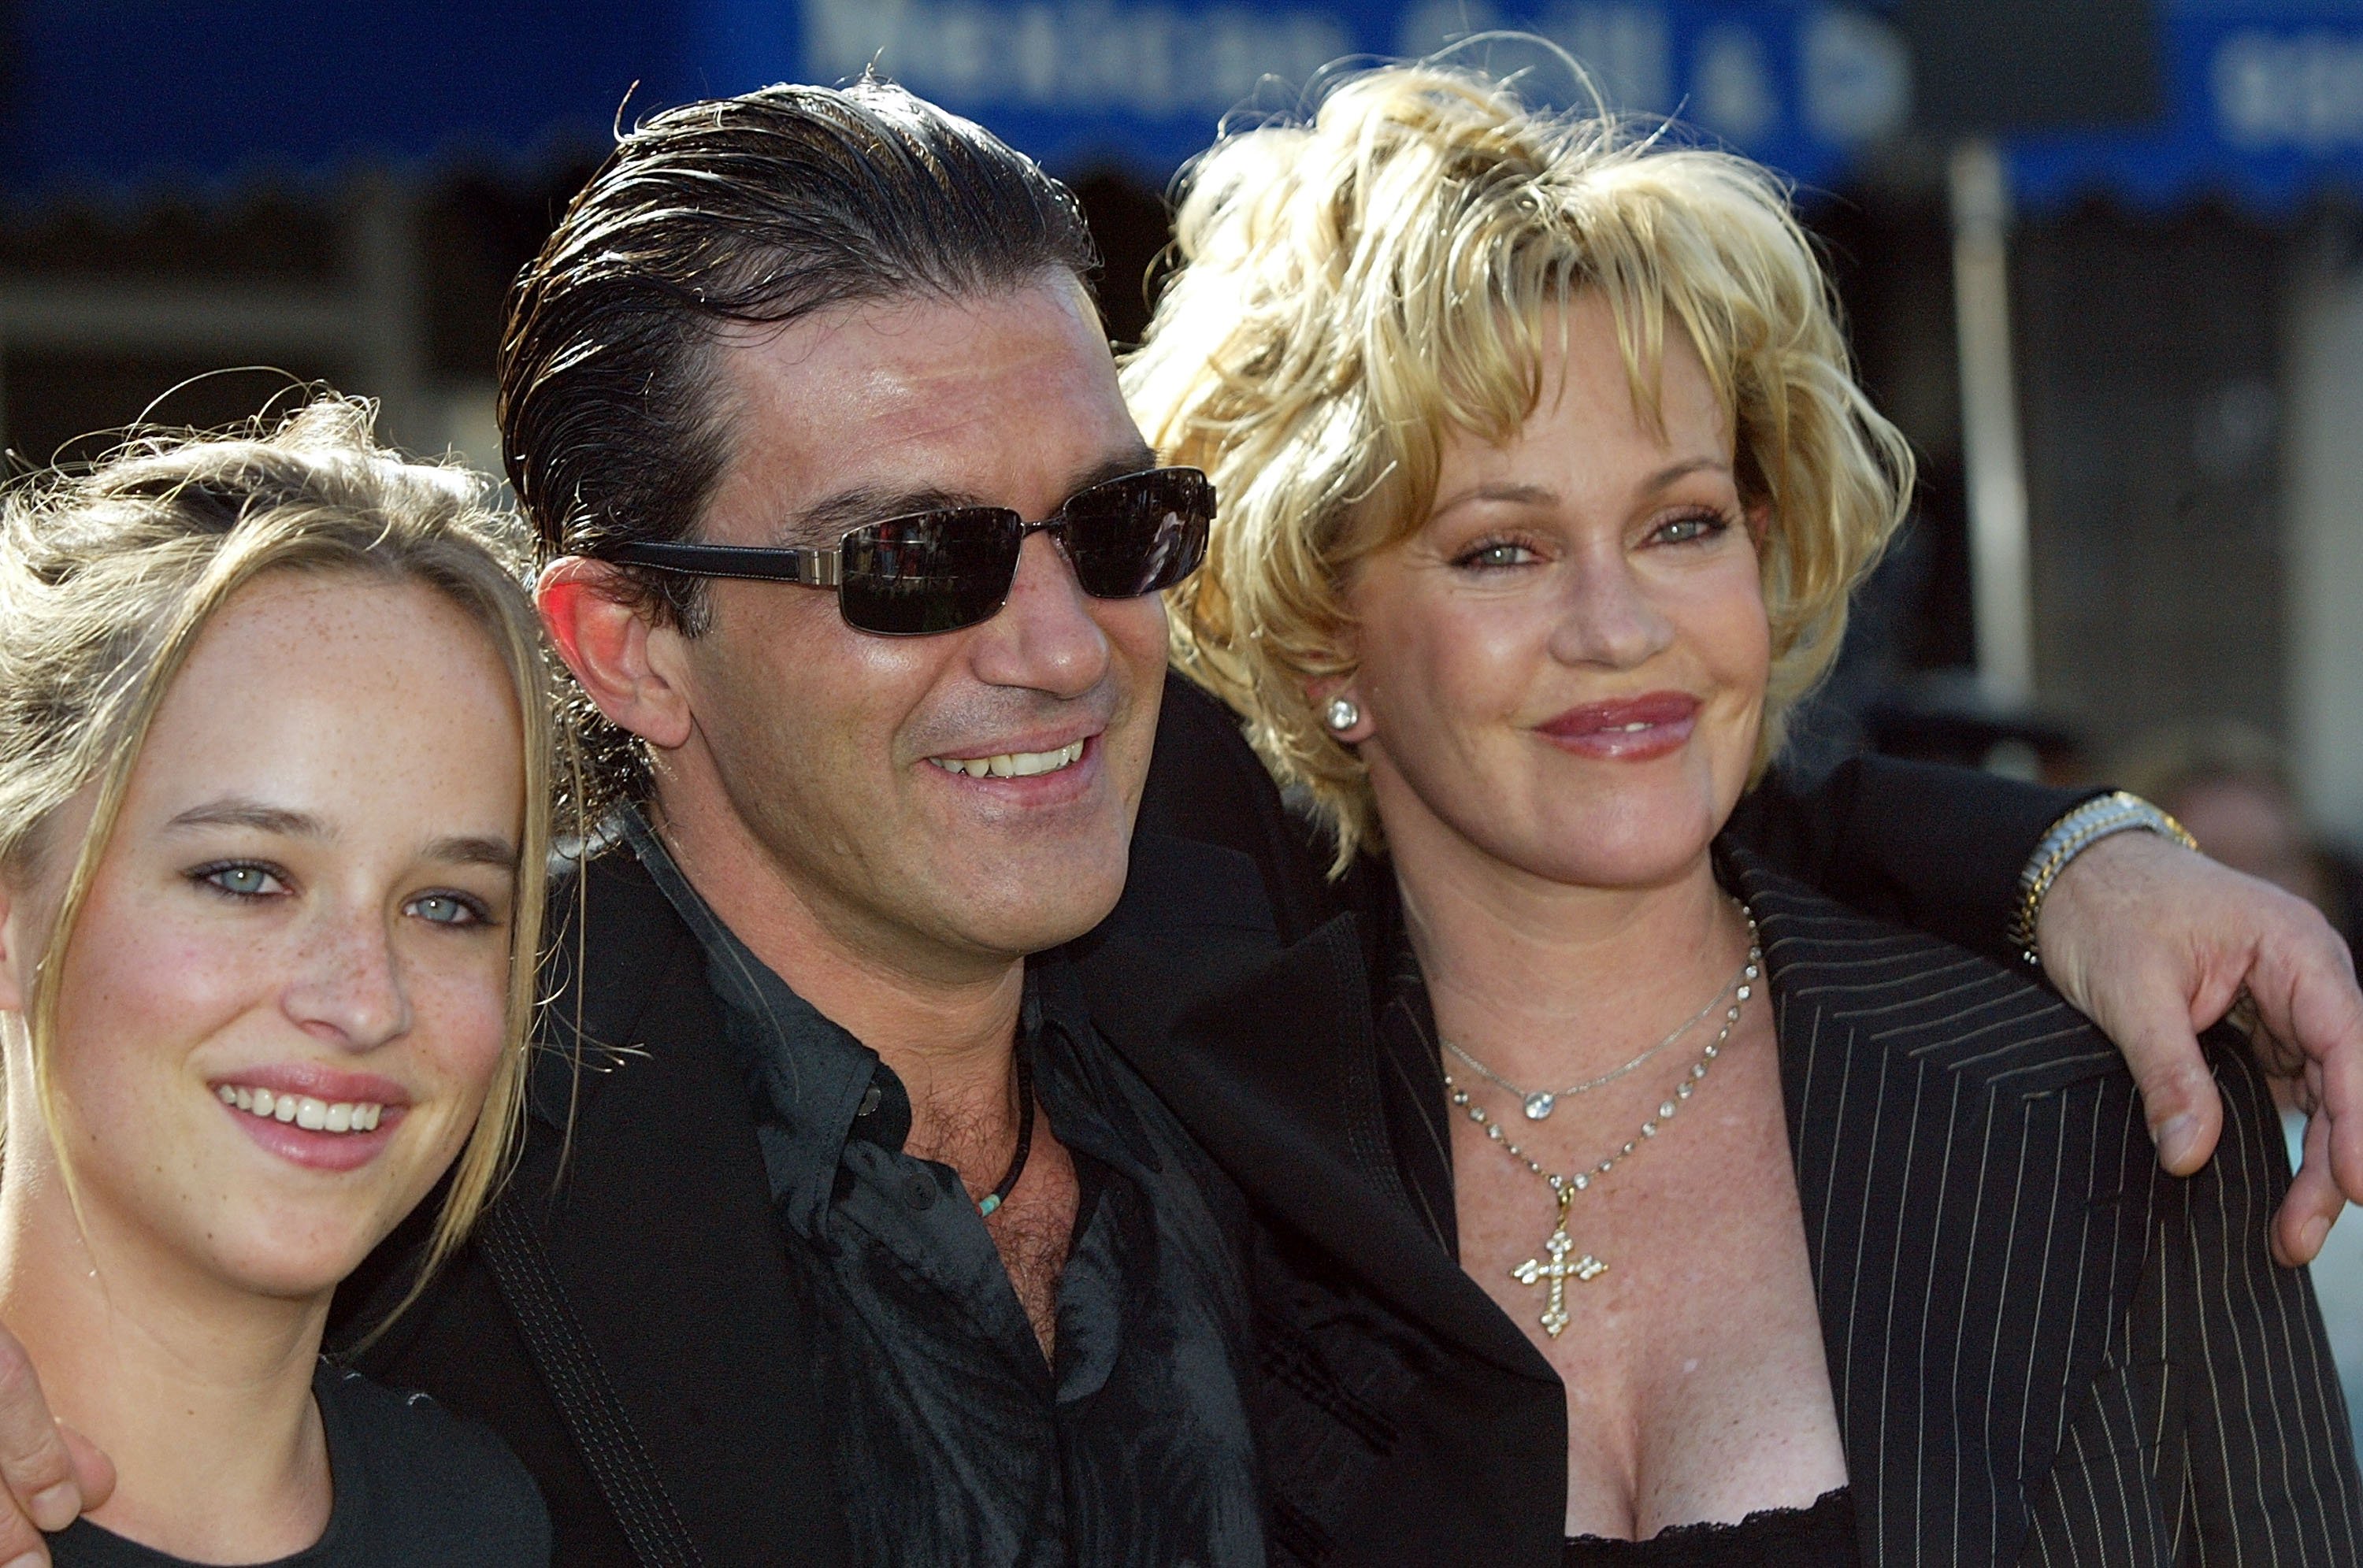 Actors Antonio Banderas and Melanie Griffith with daughter Dakota Johnson at the Los Angeles premiere of the Dreamworks Pictures' film "Shrek 2" at the Mann Village Theatre May 8, 2004 in Westwood, California. | Source: Getty Images